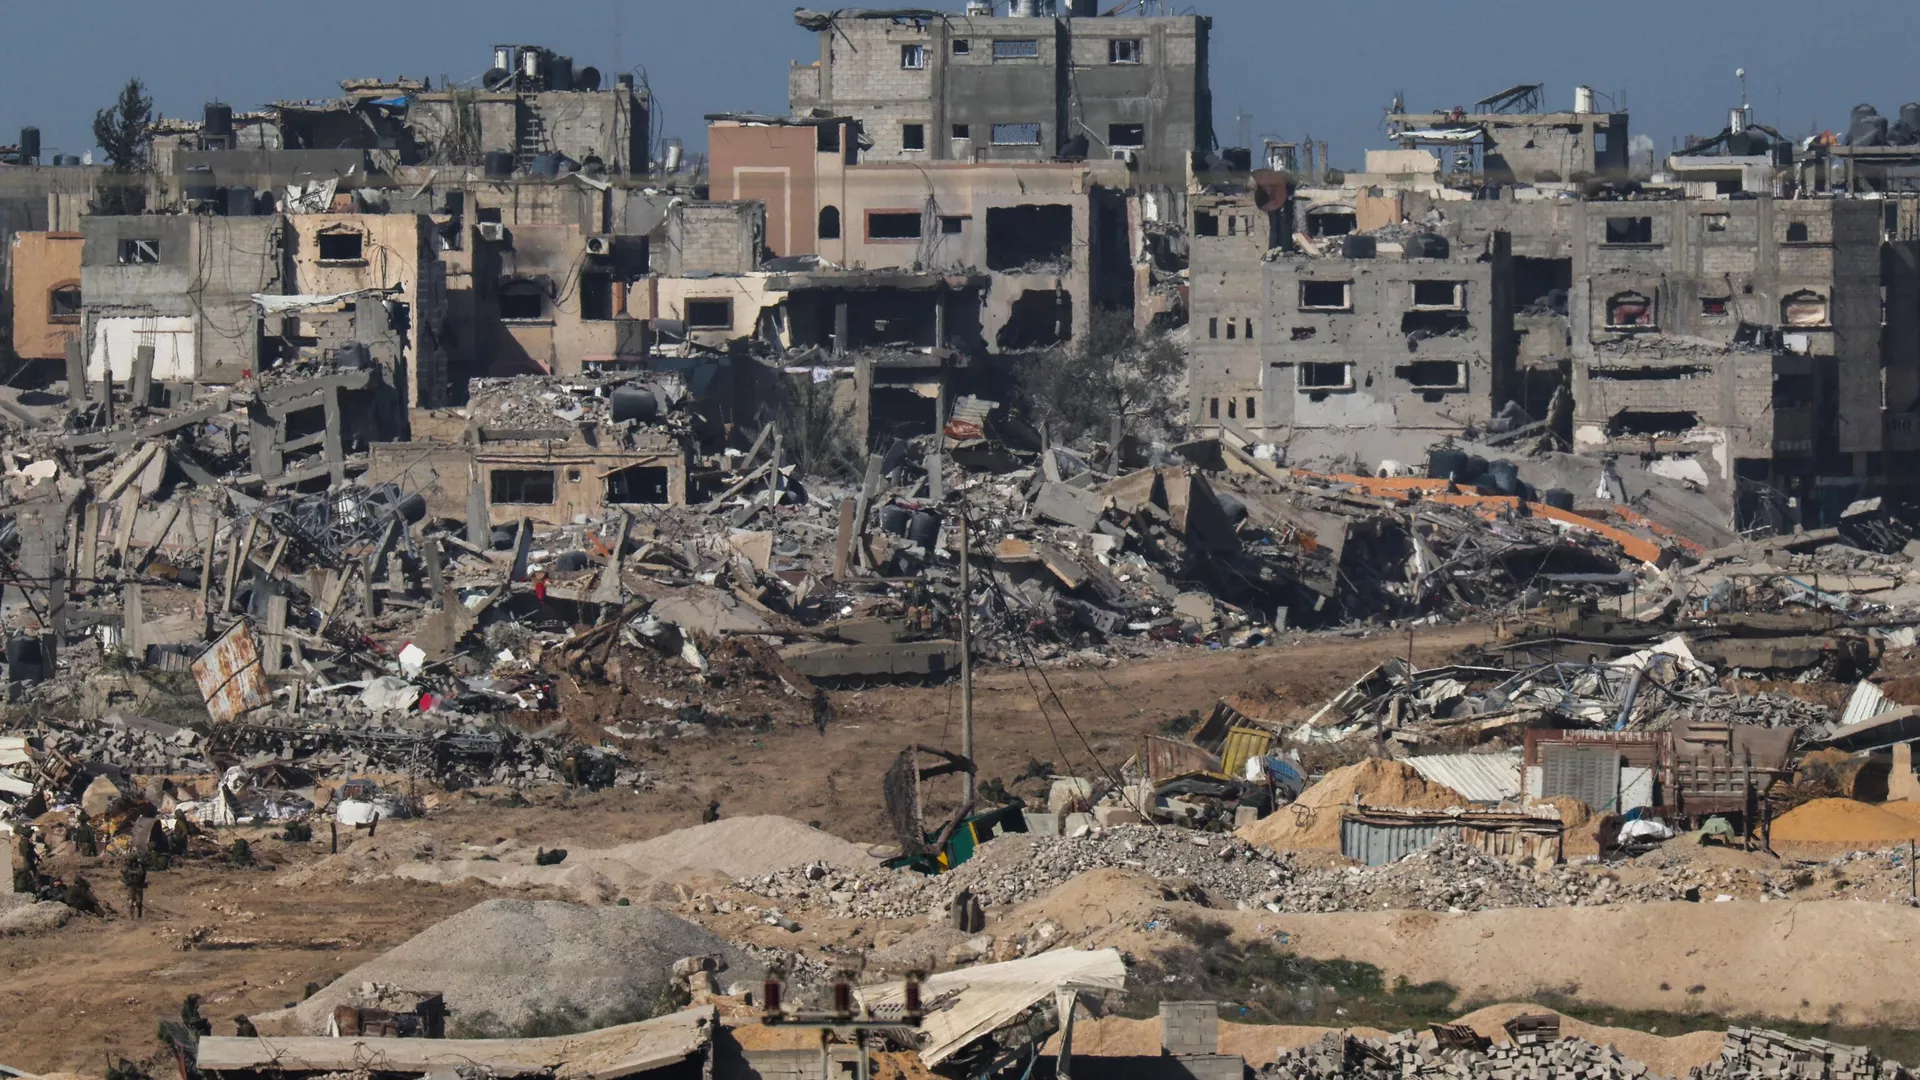 The United States is preparing to expand the Gaza war into a regional conflict